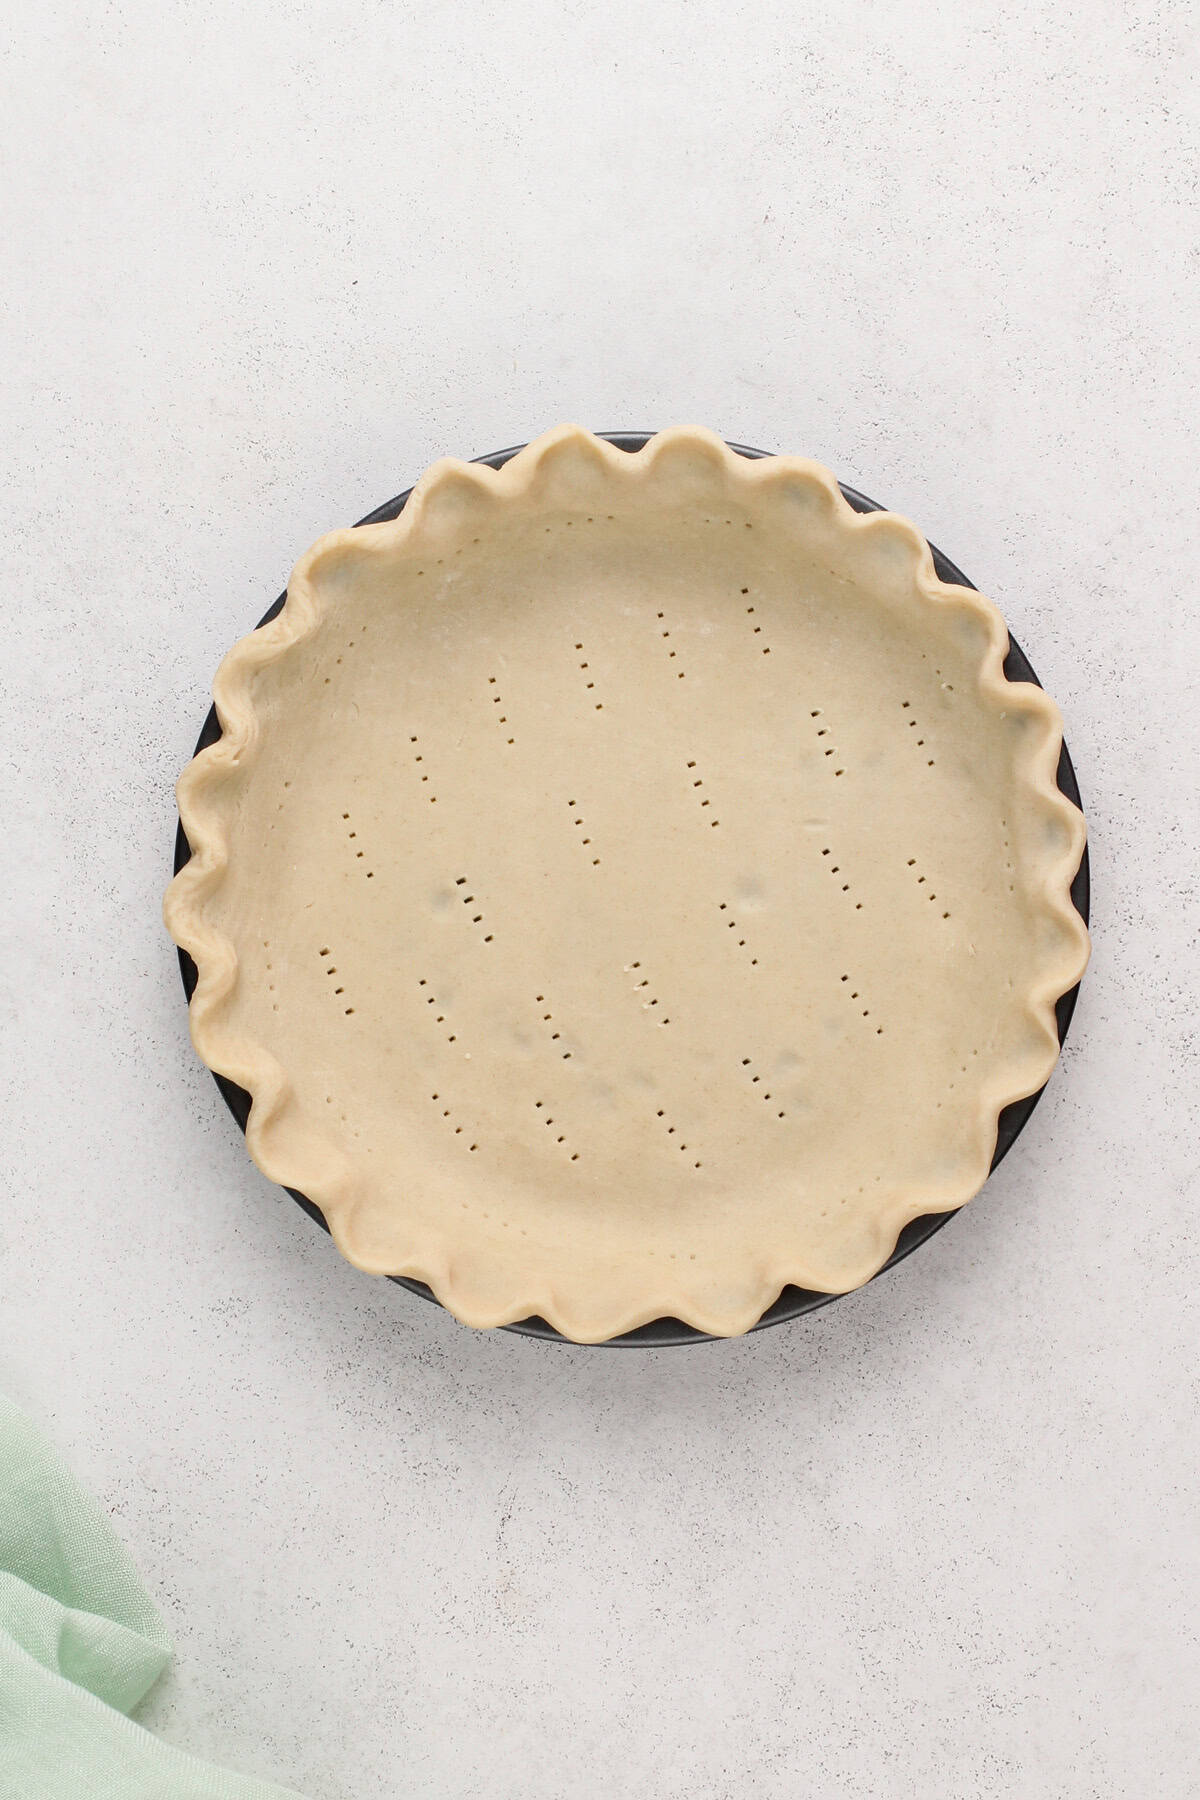 Unbaked pie crust with holes poked along the bottom and sides.